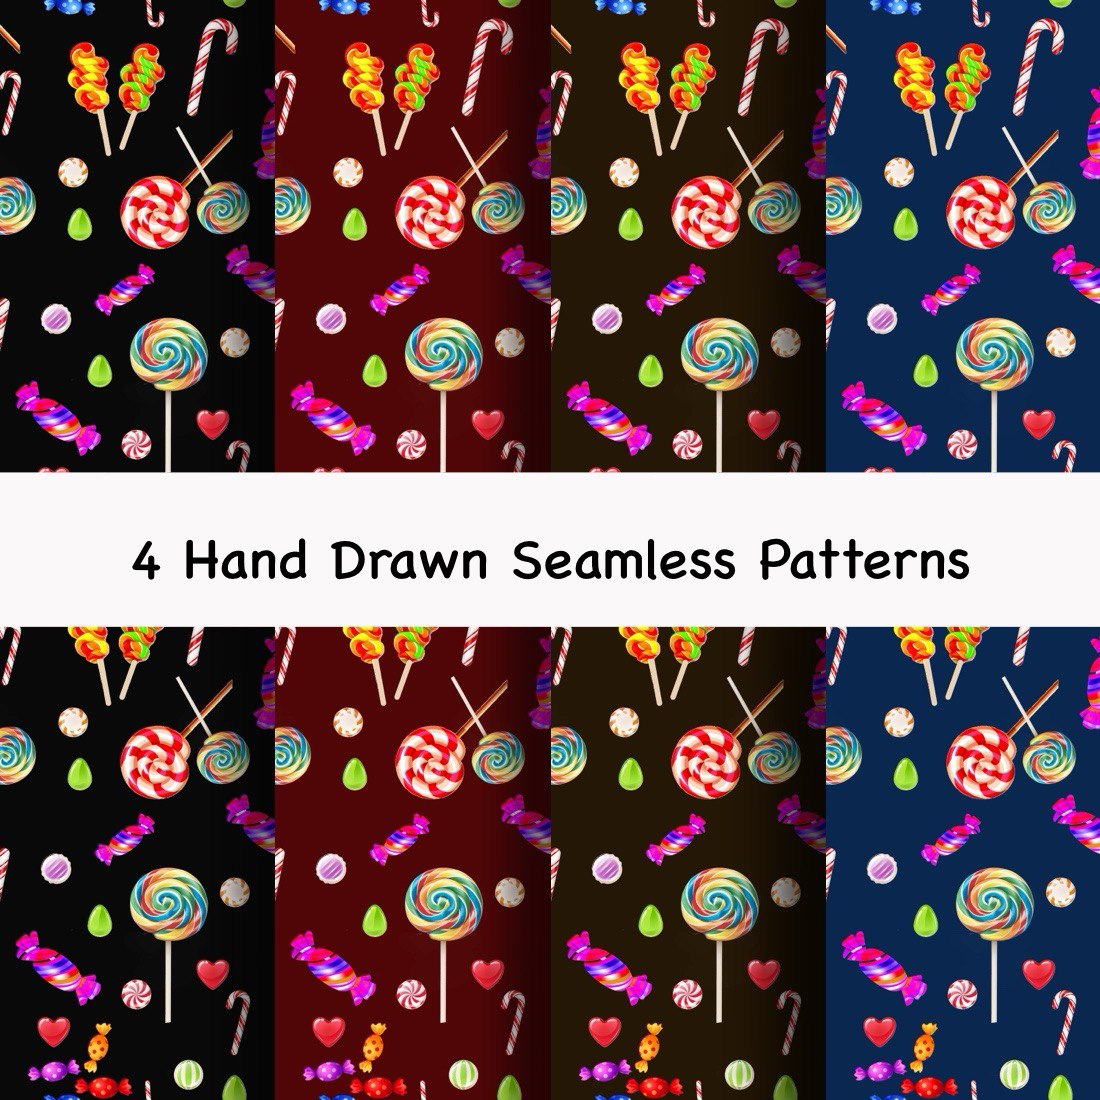 4 Hand Drawn Seamles Patttrns Candy sweets sweet cover image.